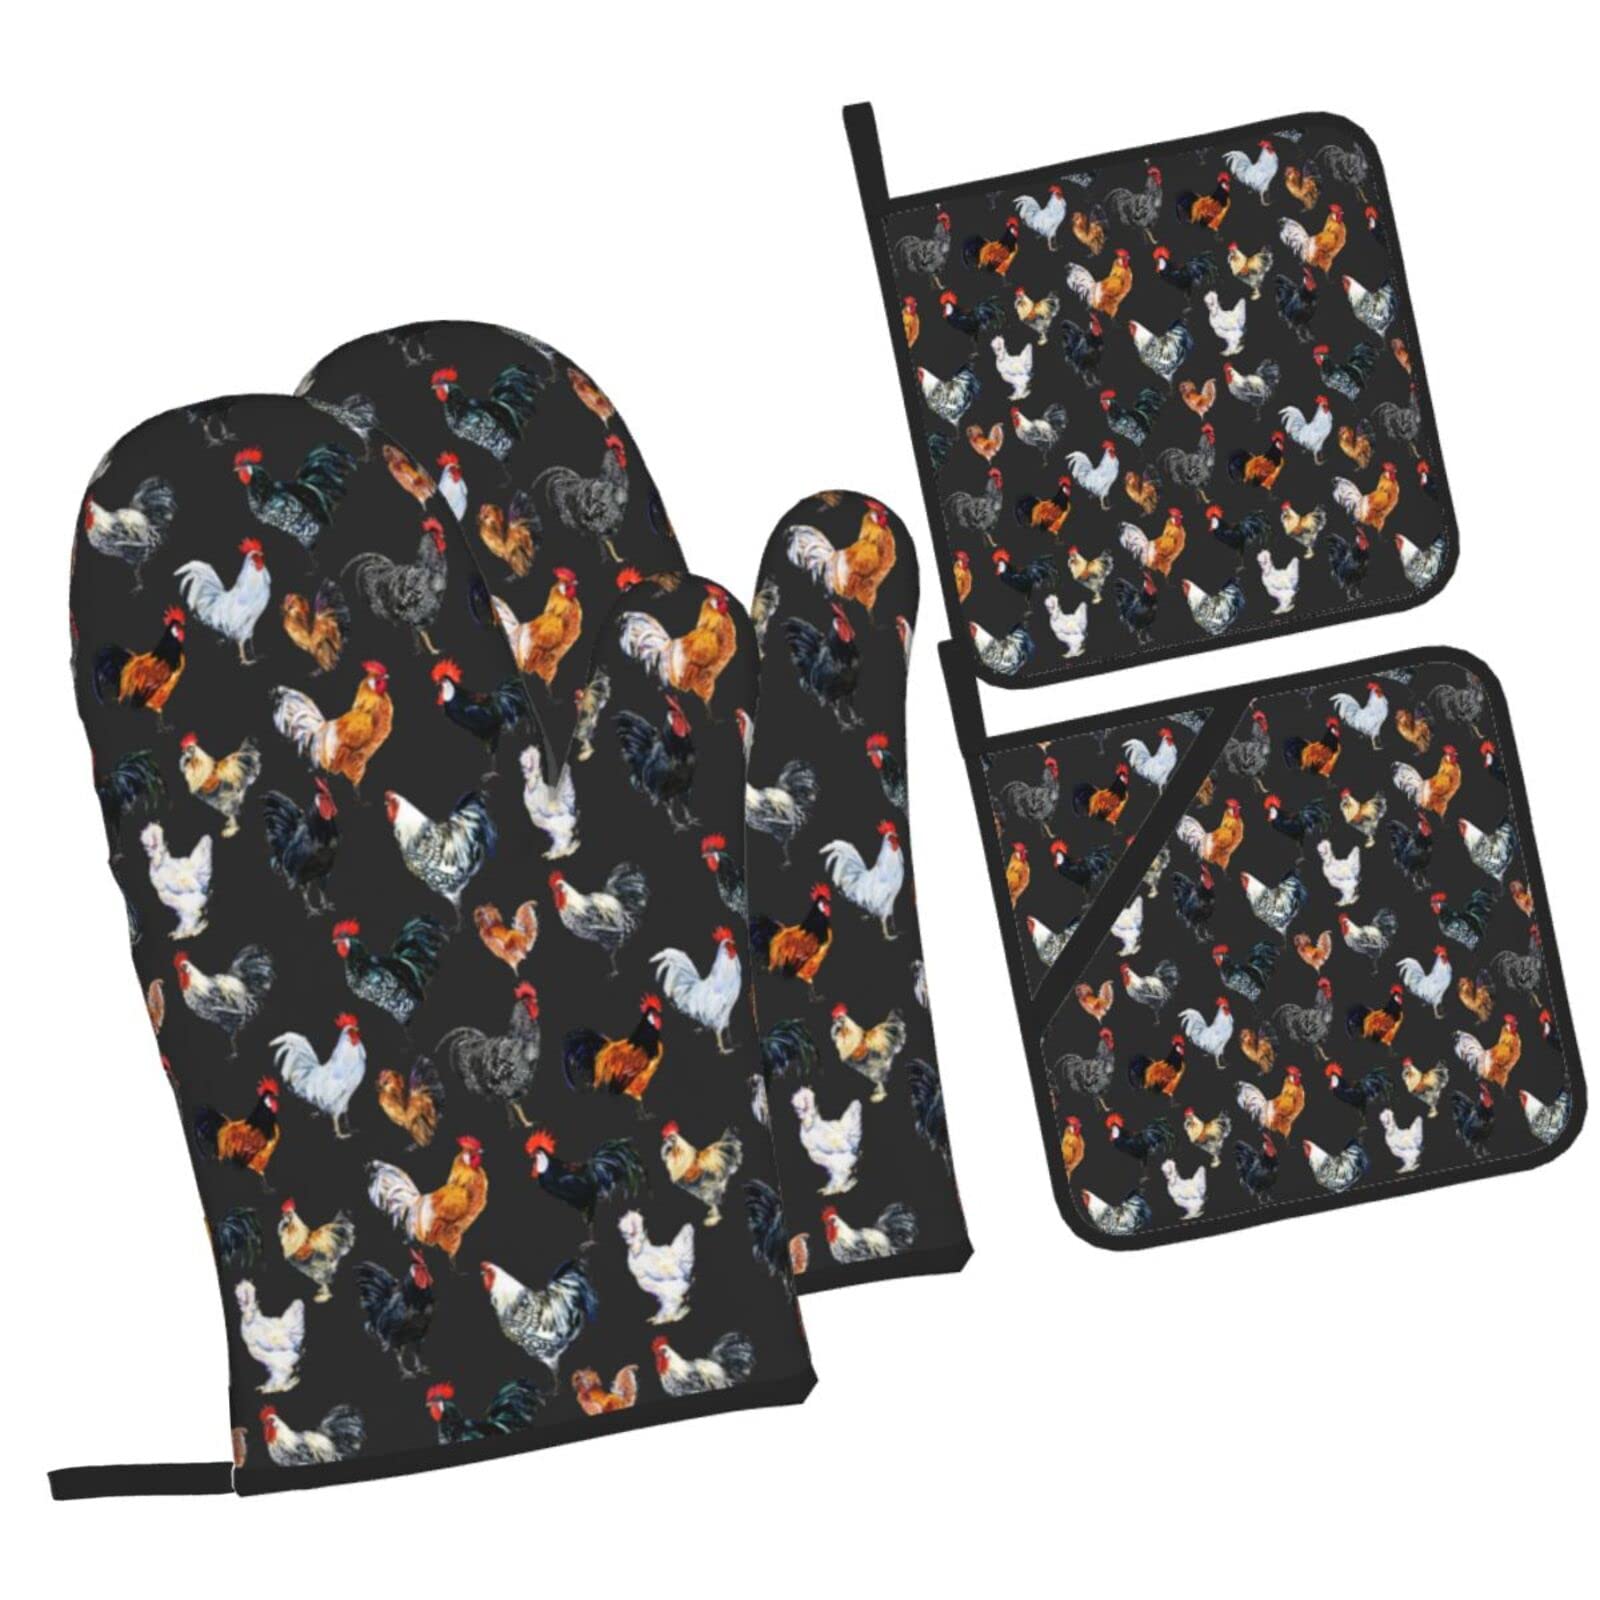 DONMYER Chicken Oven Mitts and Pot Holders Sets of 4 Rooster Oven Gloves Set Cock Kitchen Mitts Heat Resistant Farmhouse Potholders for Kitchen Baking Grilling